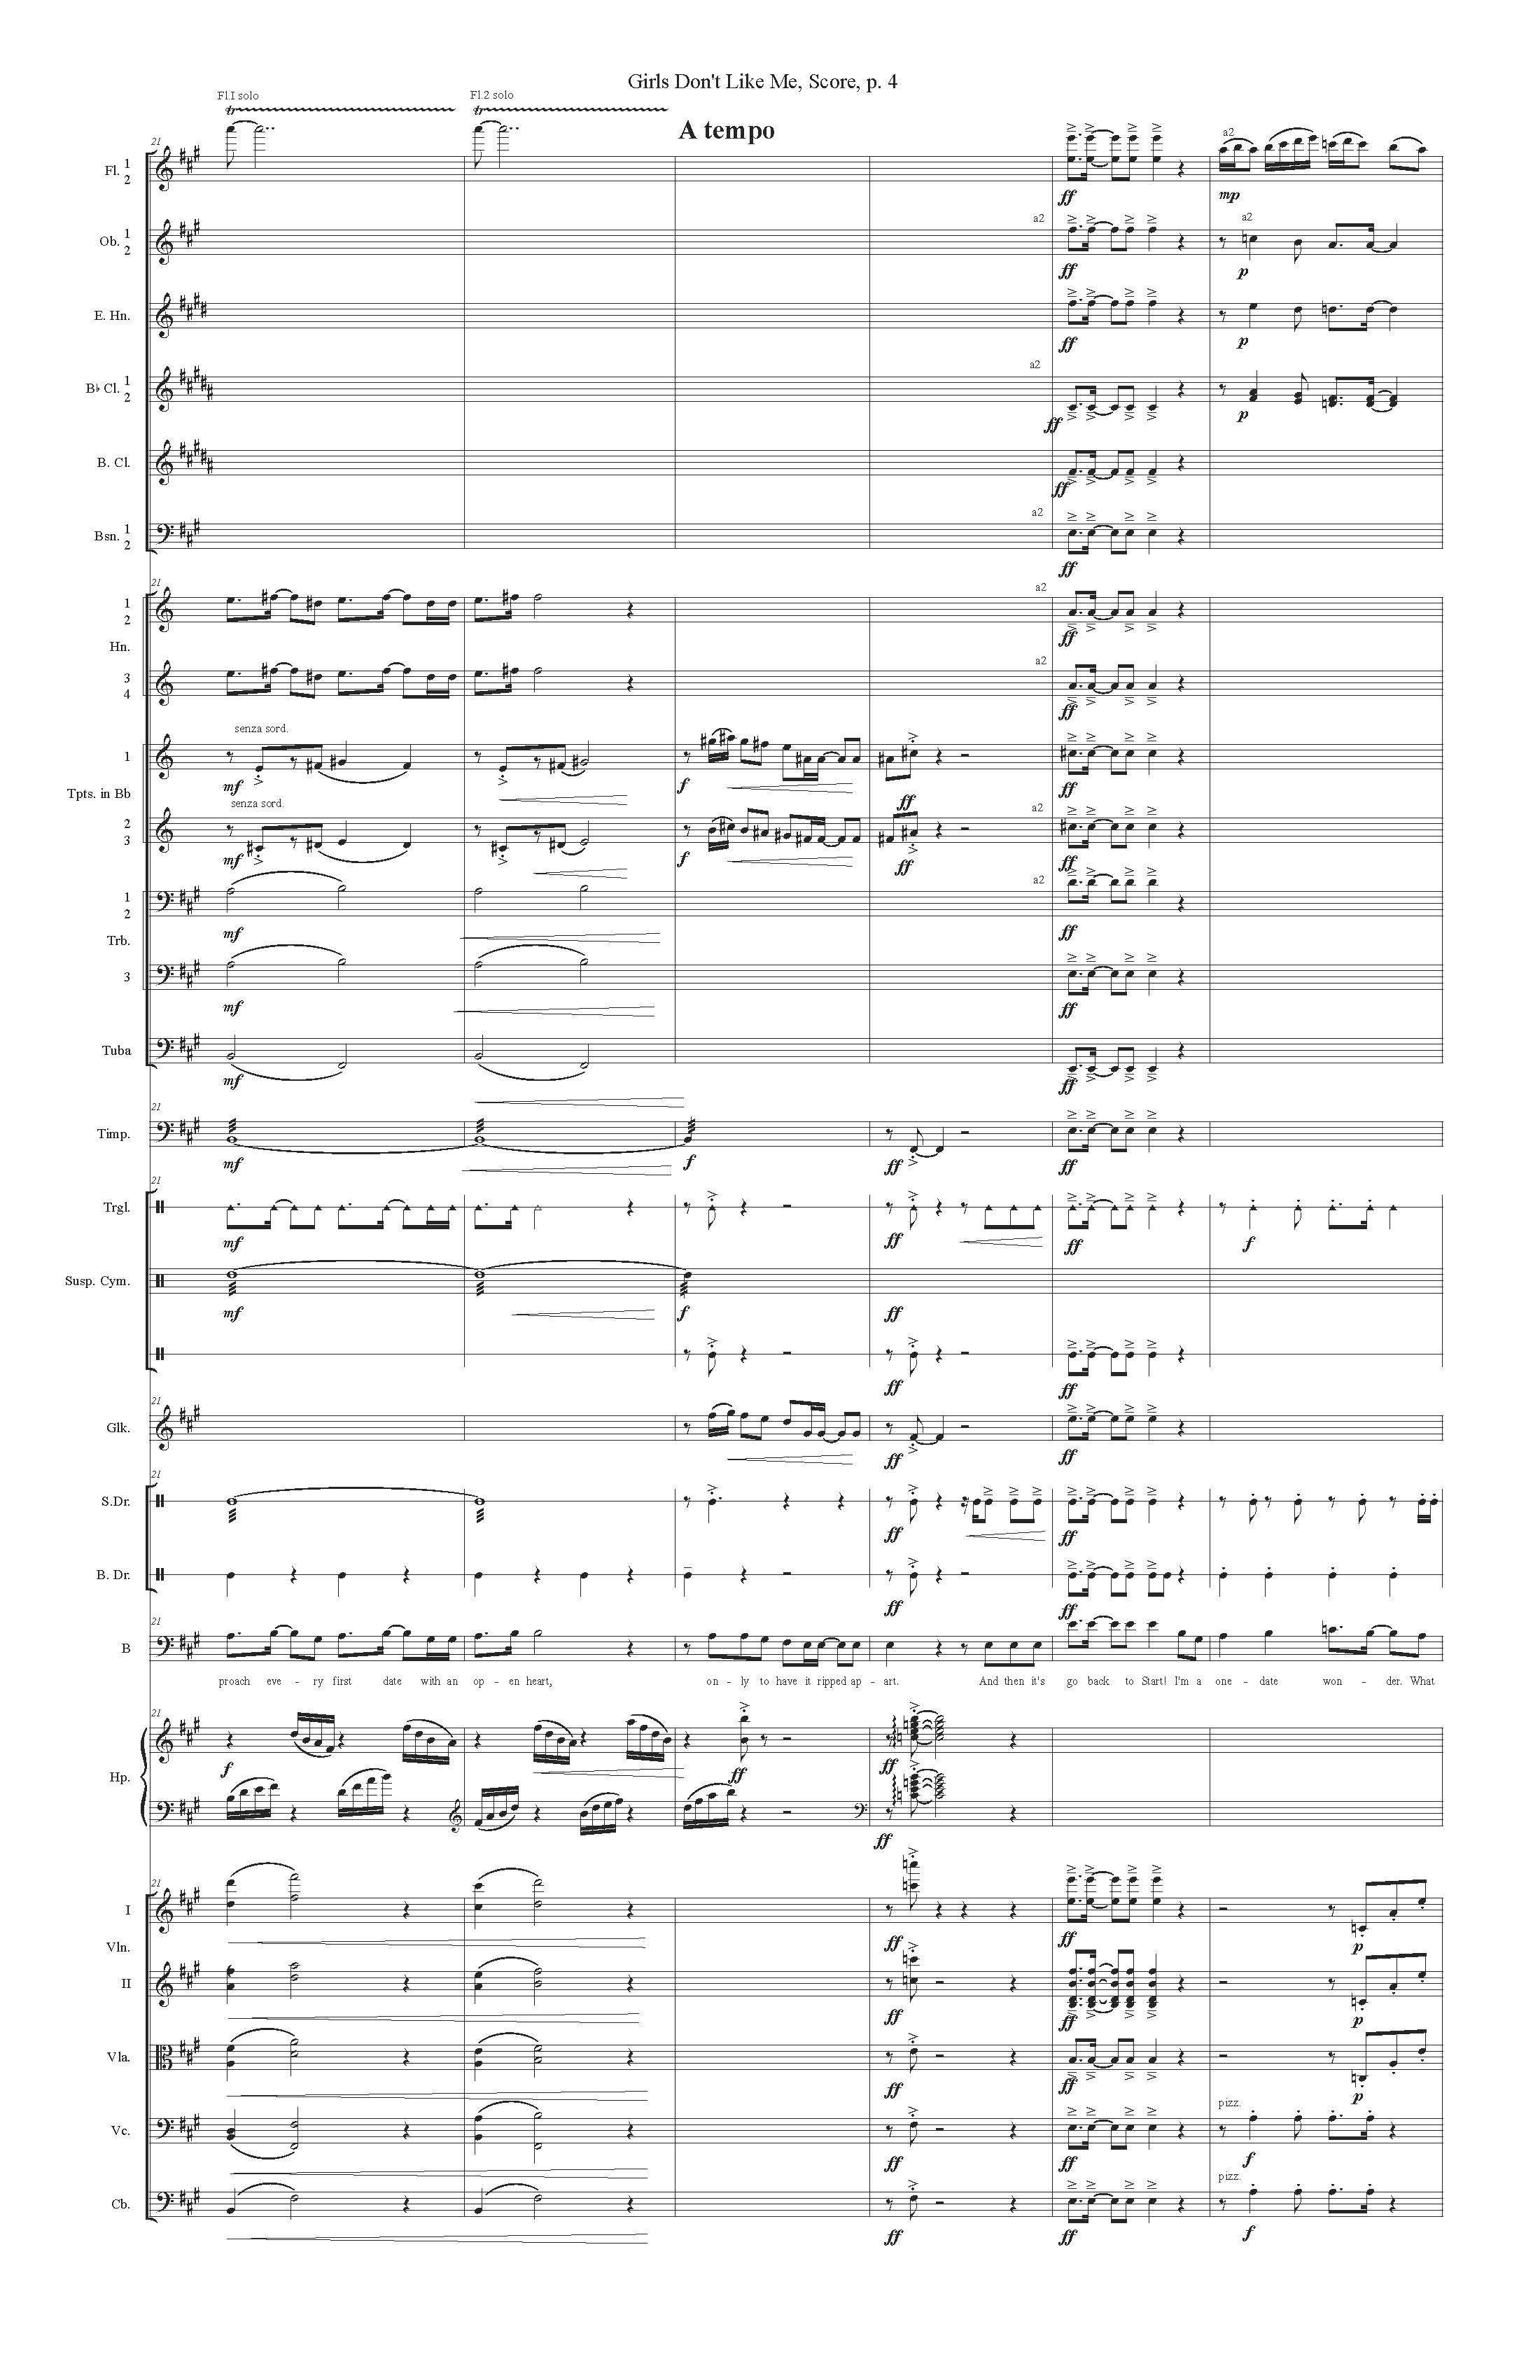 GIRLS DON'T LIKE ME ORCH - Score_Page_04.jpg